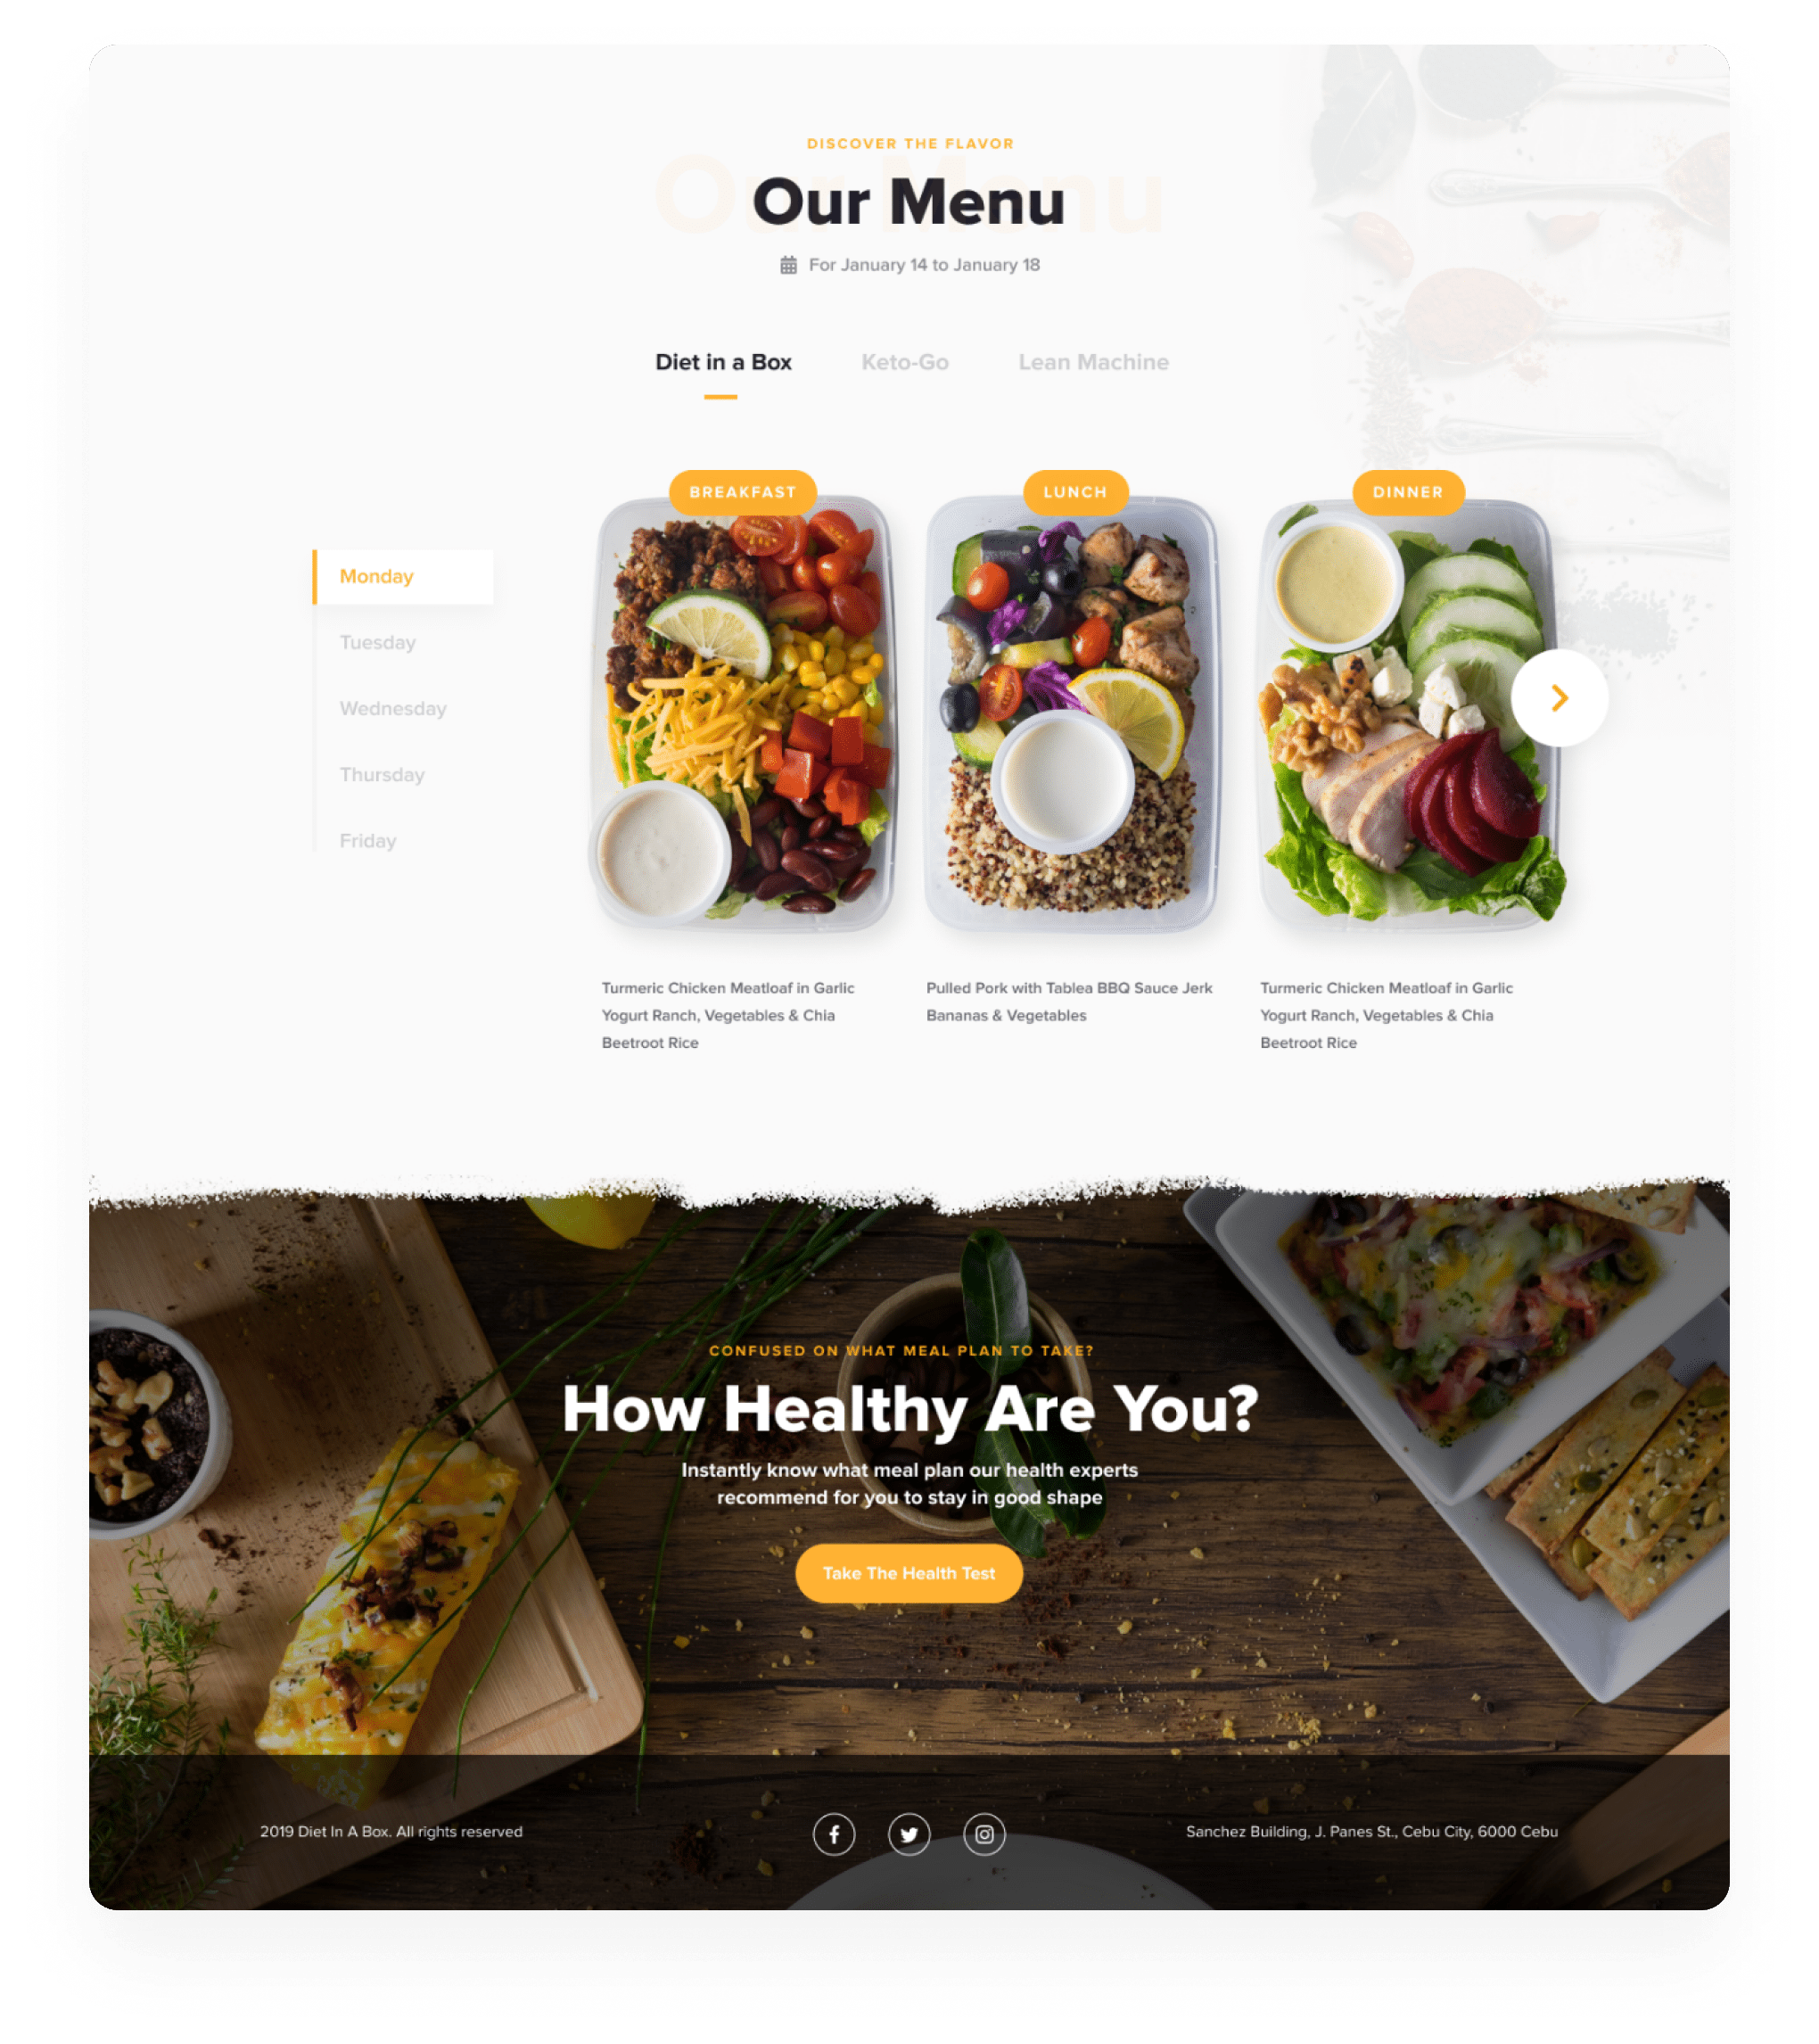 Menu Section of the Website